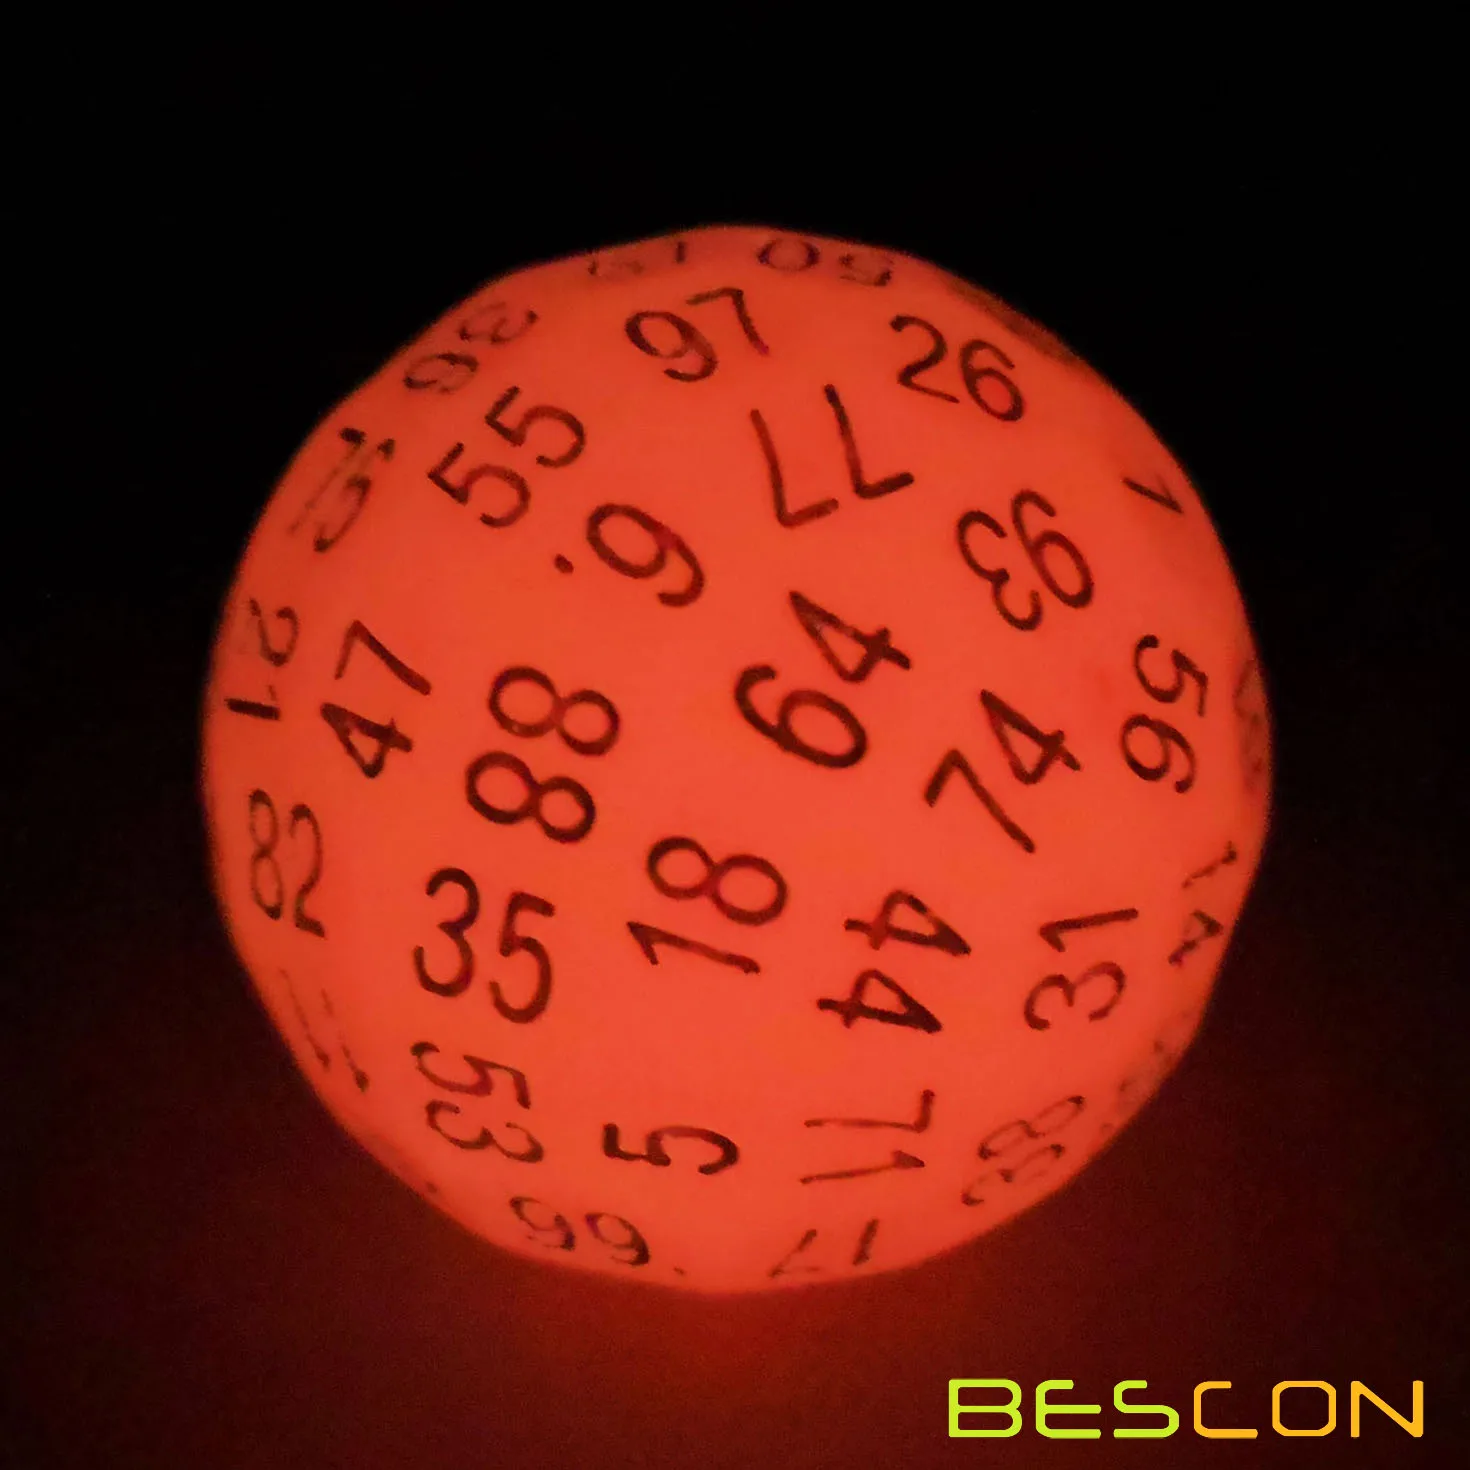 

Bescon Glowing Polyhedral 100 Sides Dice Cerise Red, Luminous D100 Dice, 100 Sided Cube, Glow in Dark D100 Game Dice